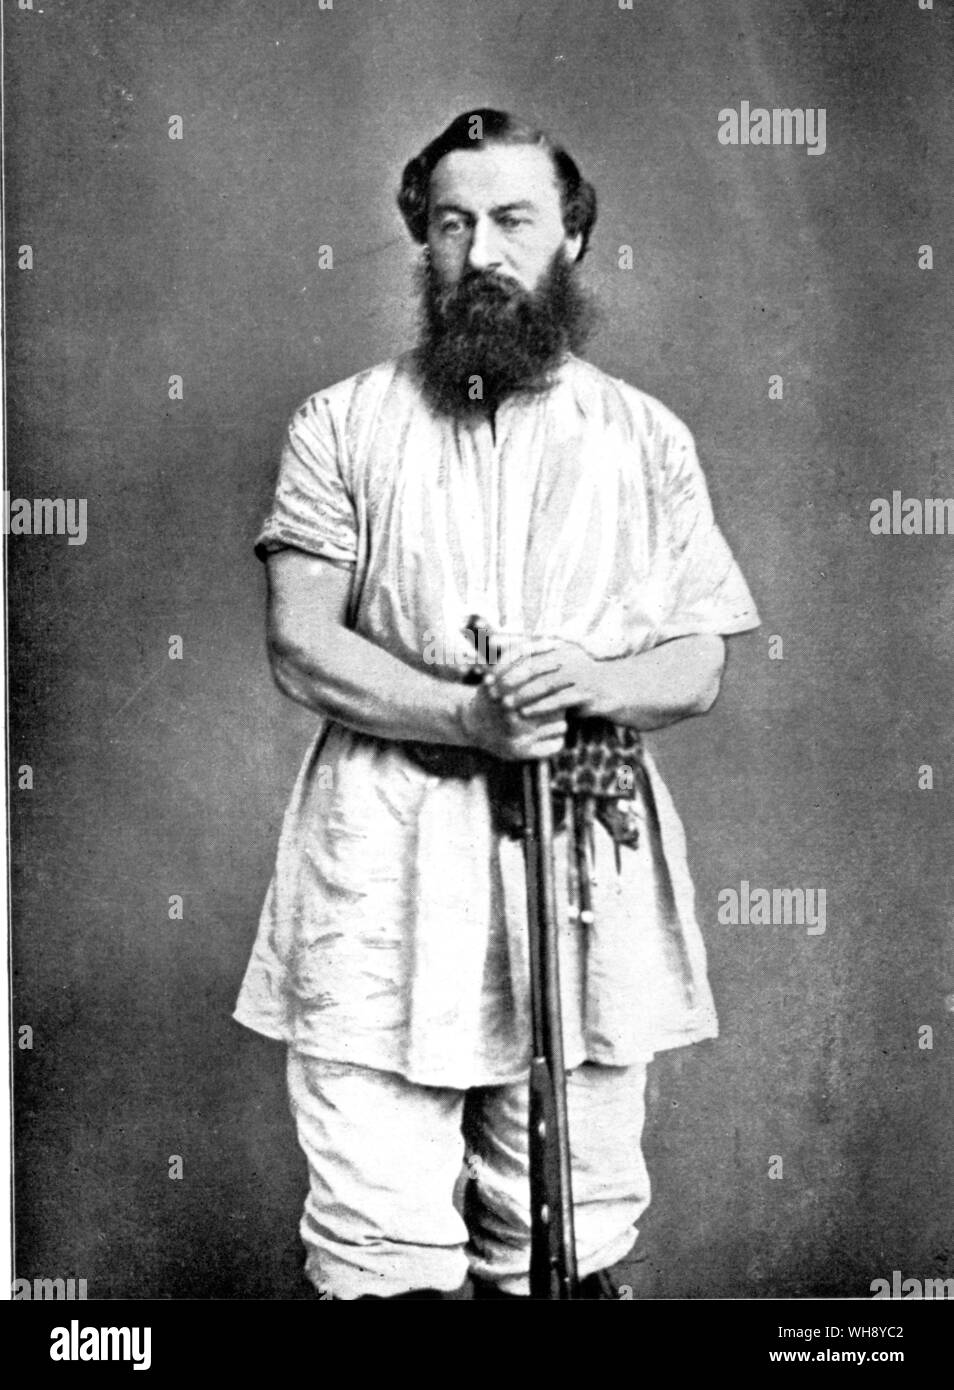 Samuel Baker, 1865. By 1874 he was described as the title- page of Ismailia: 'Sir Samuel W. Baker Pacha, MA, FRS, FRGS. Major-General of the Ottoman Empire, Member of teh Orders Osmanie and the Medjidie, Late Governor-General of the Equatorial Nile Basin, Gold Medallist of the Royal Geographical Society, Grande Medaille d'Or de la Societe de Geographie de Paris... Author of The Albert N'yanza Great Basin of the Nile... The Rifle and Hound in VCeylon etc .., etc Stock Photo